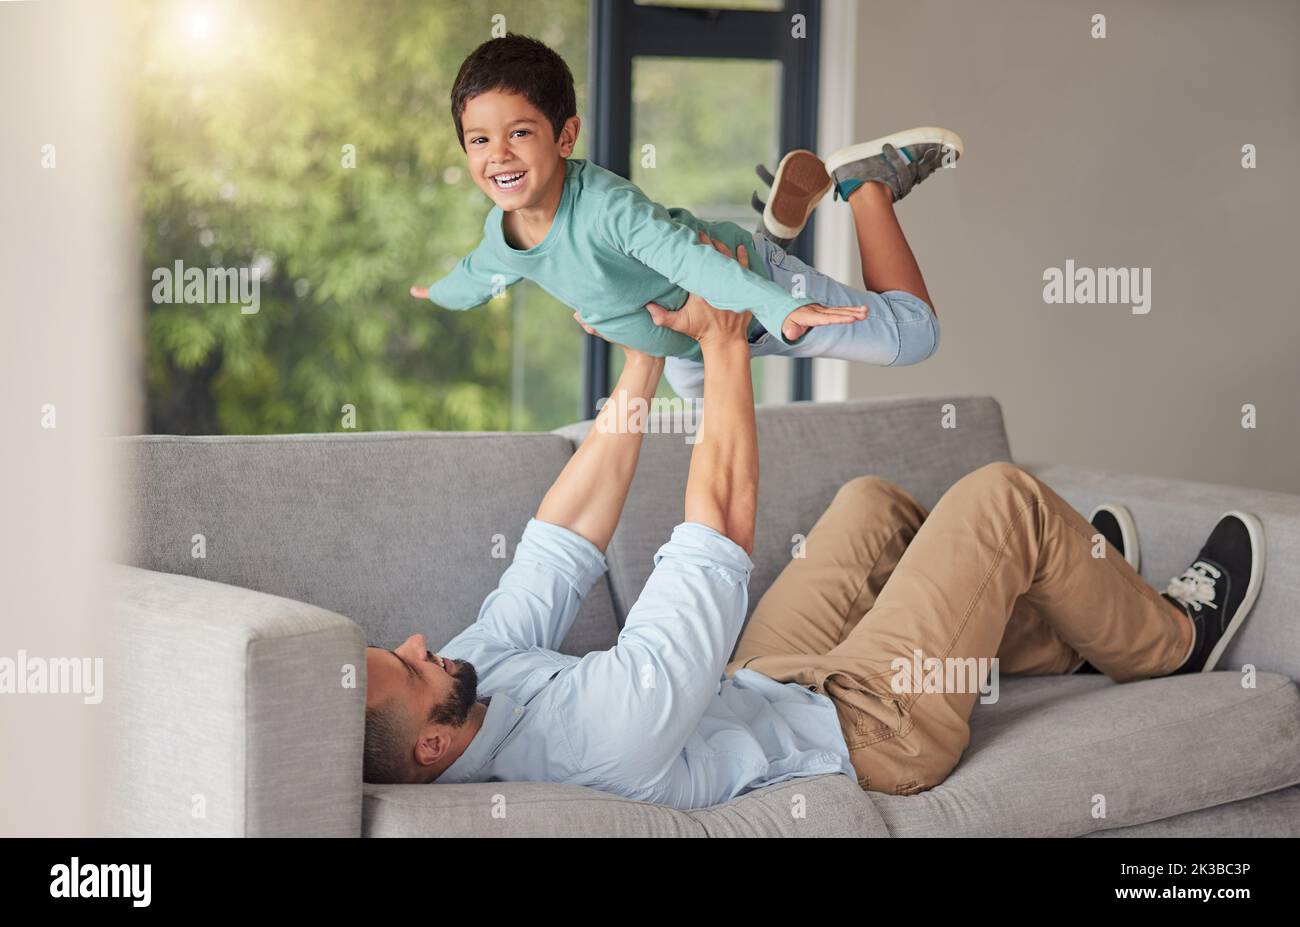 Happy family, love and father and son bonding on a sofa at home, playing and being creative with a fun game. Energy, fantasy and airplane pose by Stock Photo